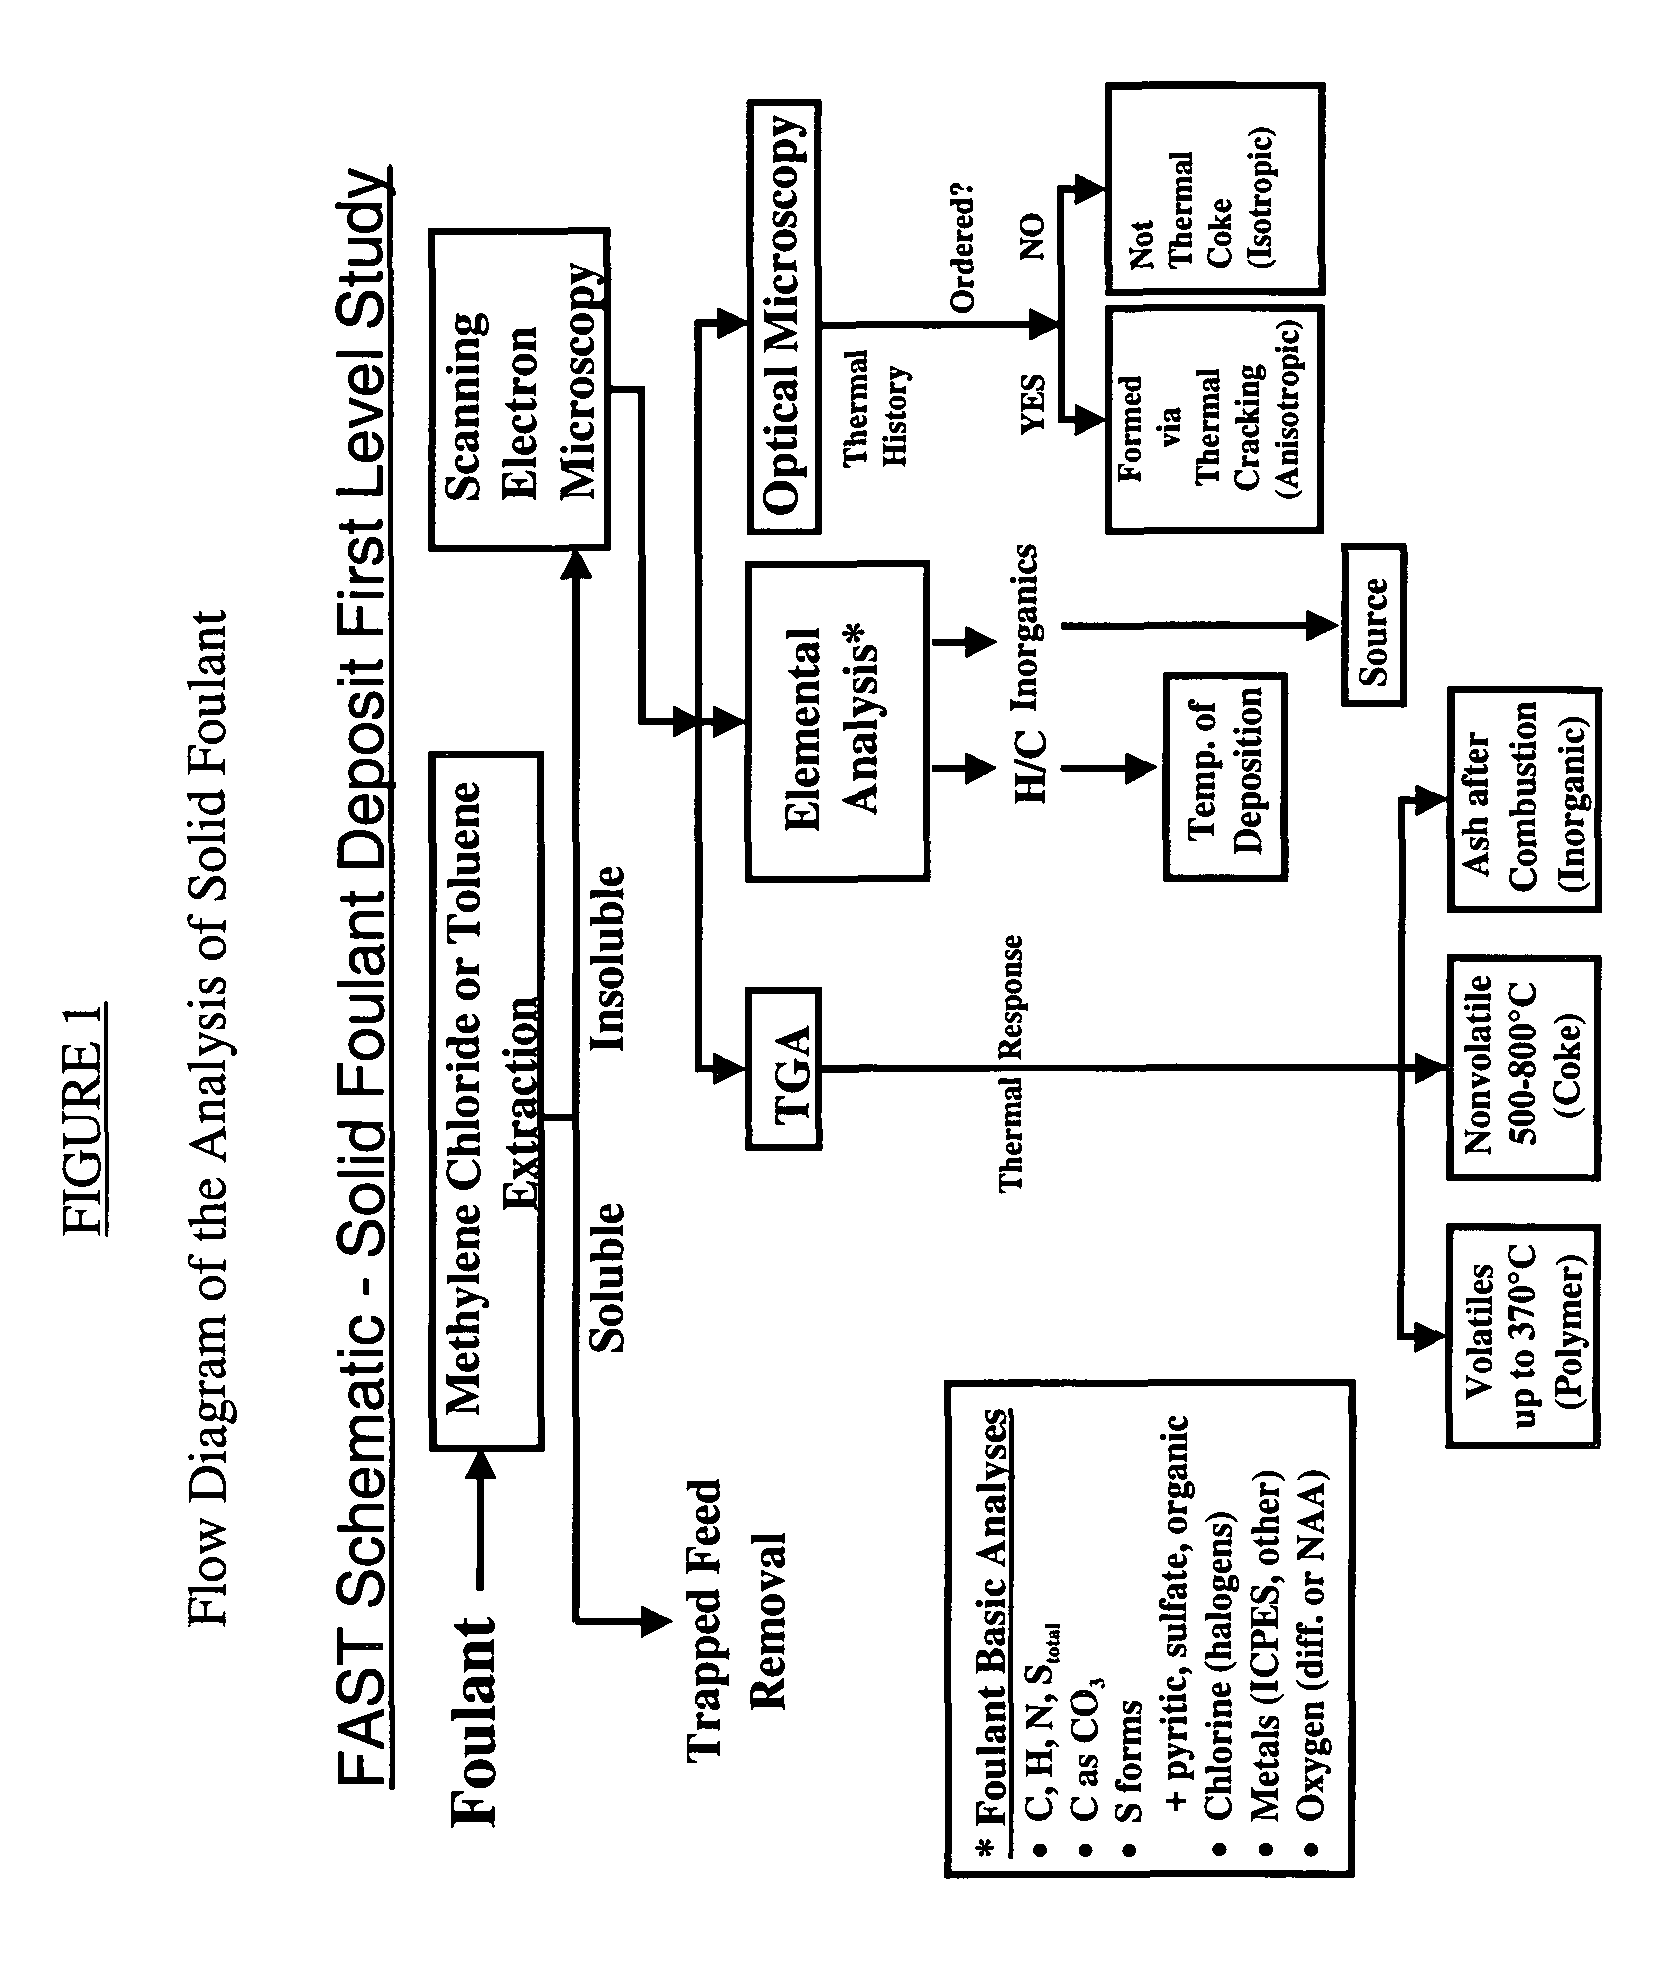 Method for refinery foulant deposit characterization